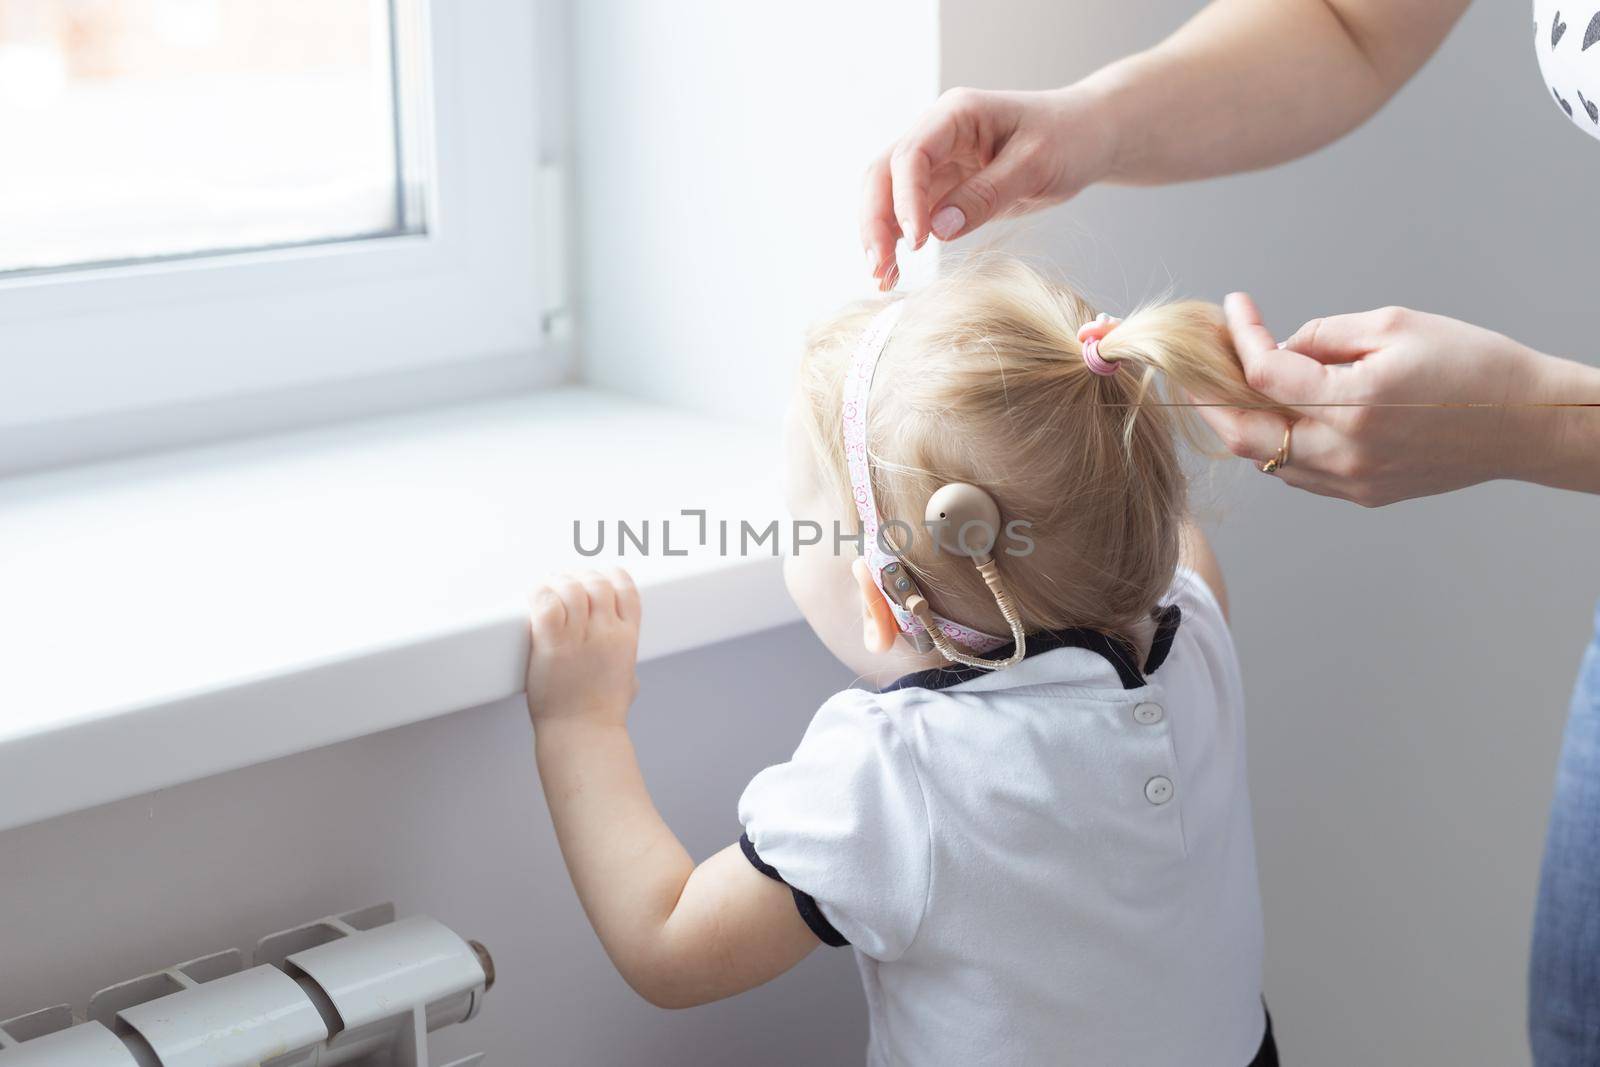 Mother fixing her daughter's cochlear implant hearing aid - deafness and diversity concept. Innovative technologies in treatment of deafness by Satura86